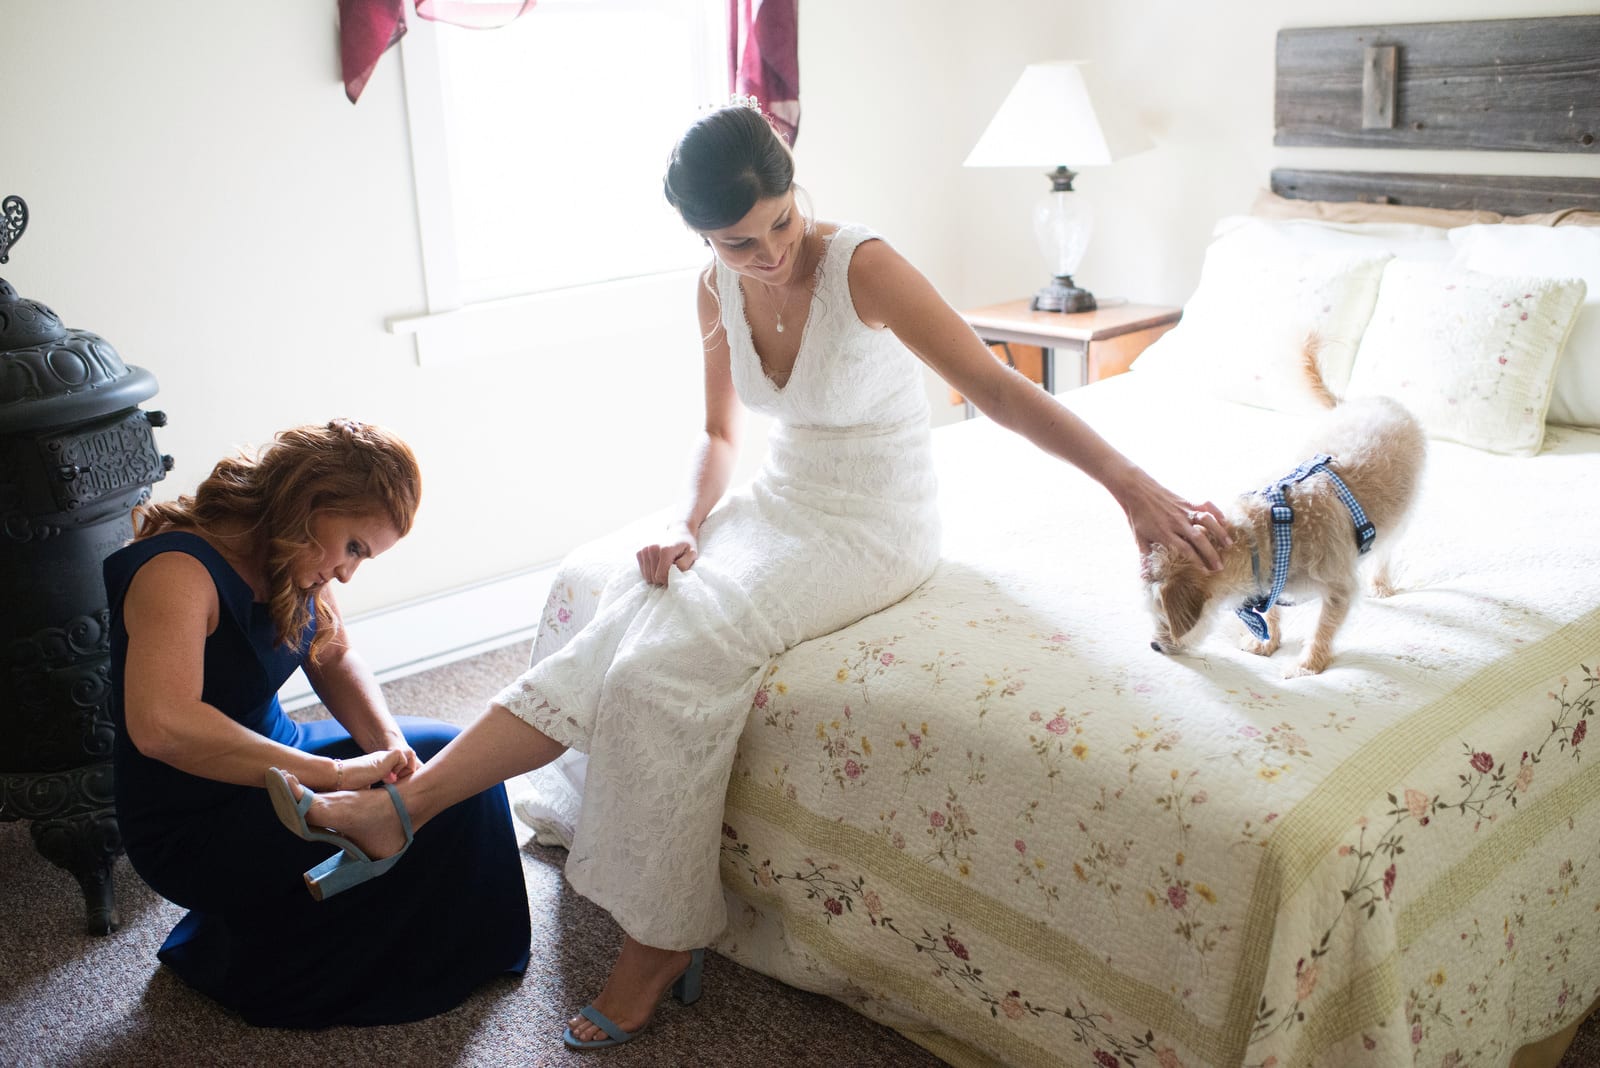 A bride pats the head of her small dog as she sits on a bed. A bridesmaid in a blue dress kneels on the floor putting the bride's shoes on.